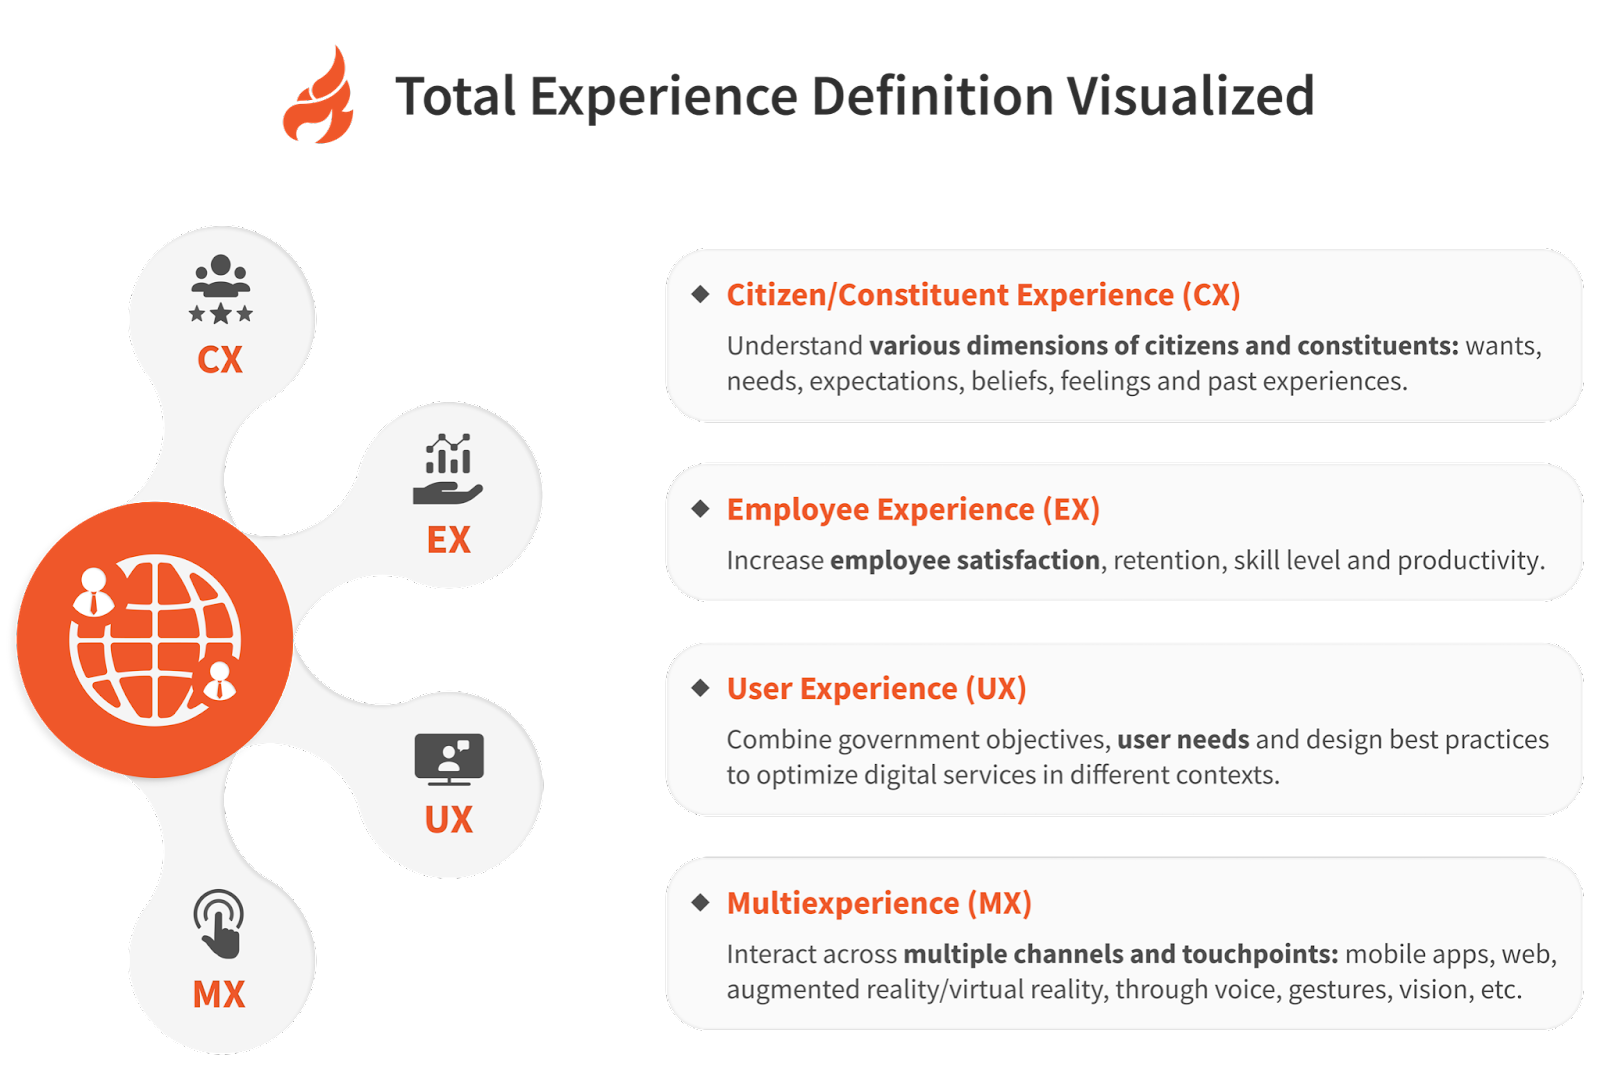 Total Experience Definition Visualized